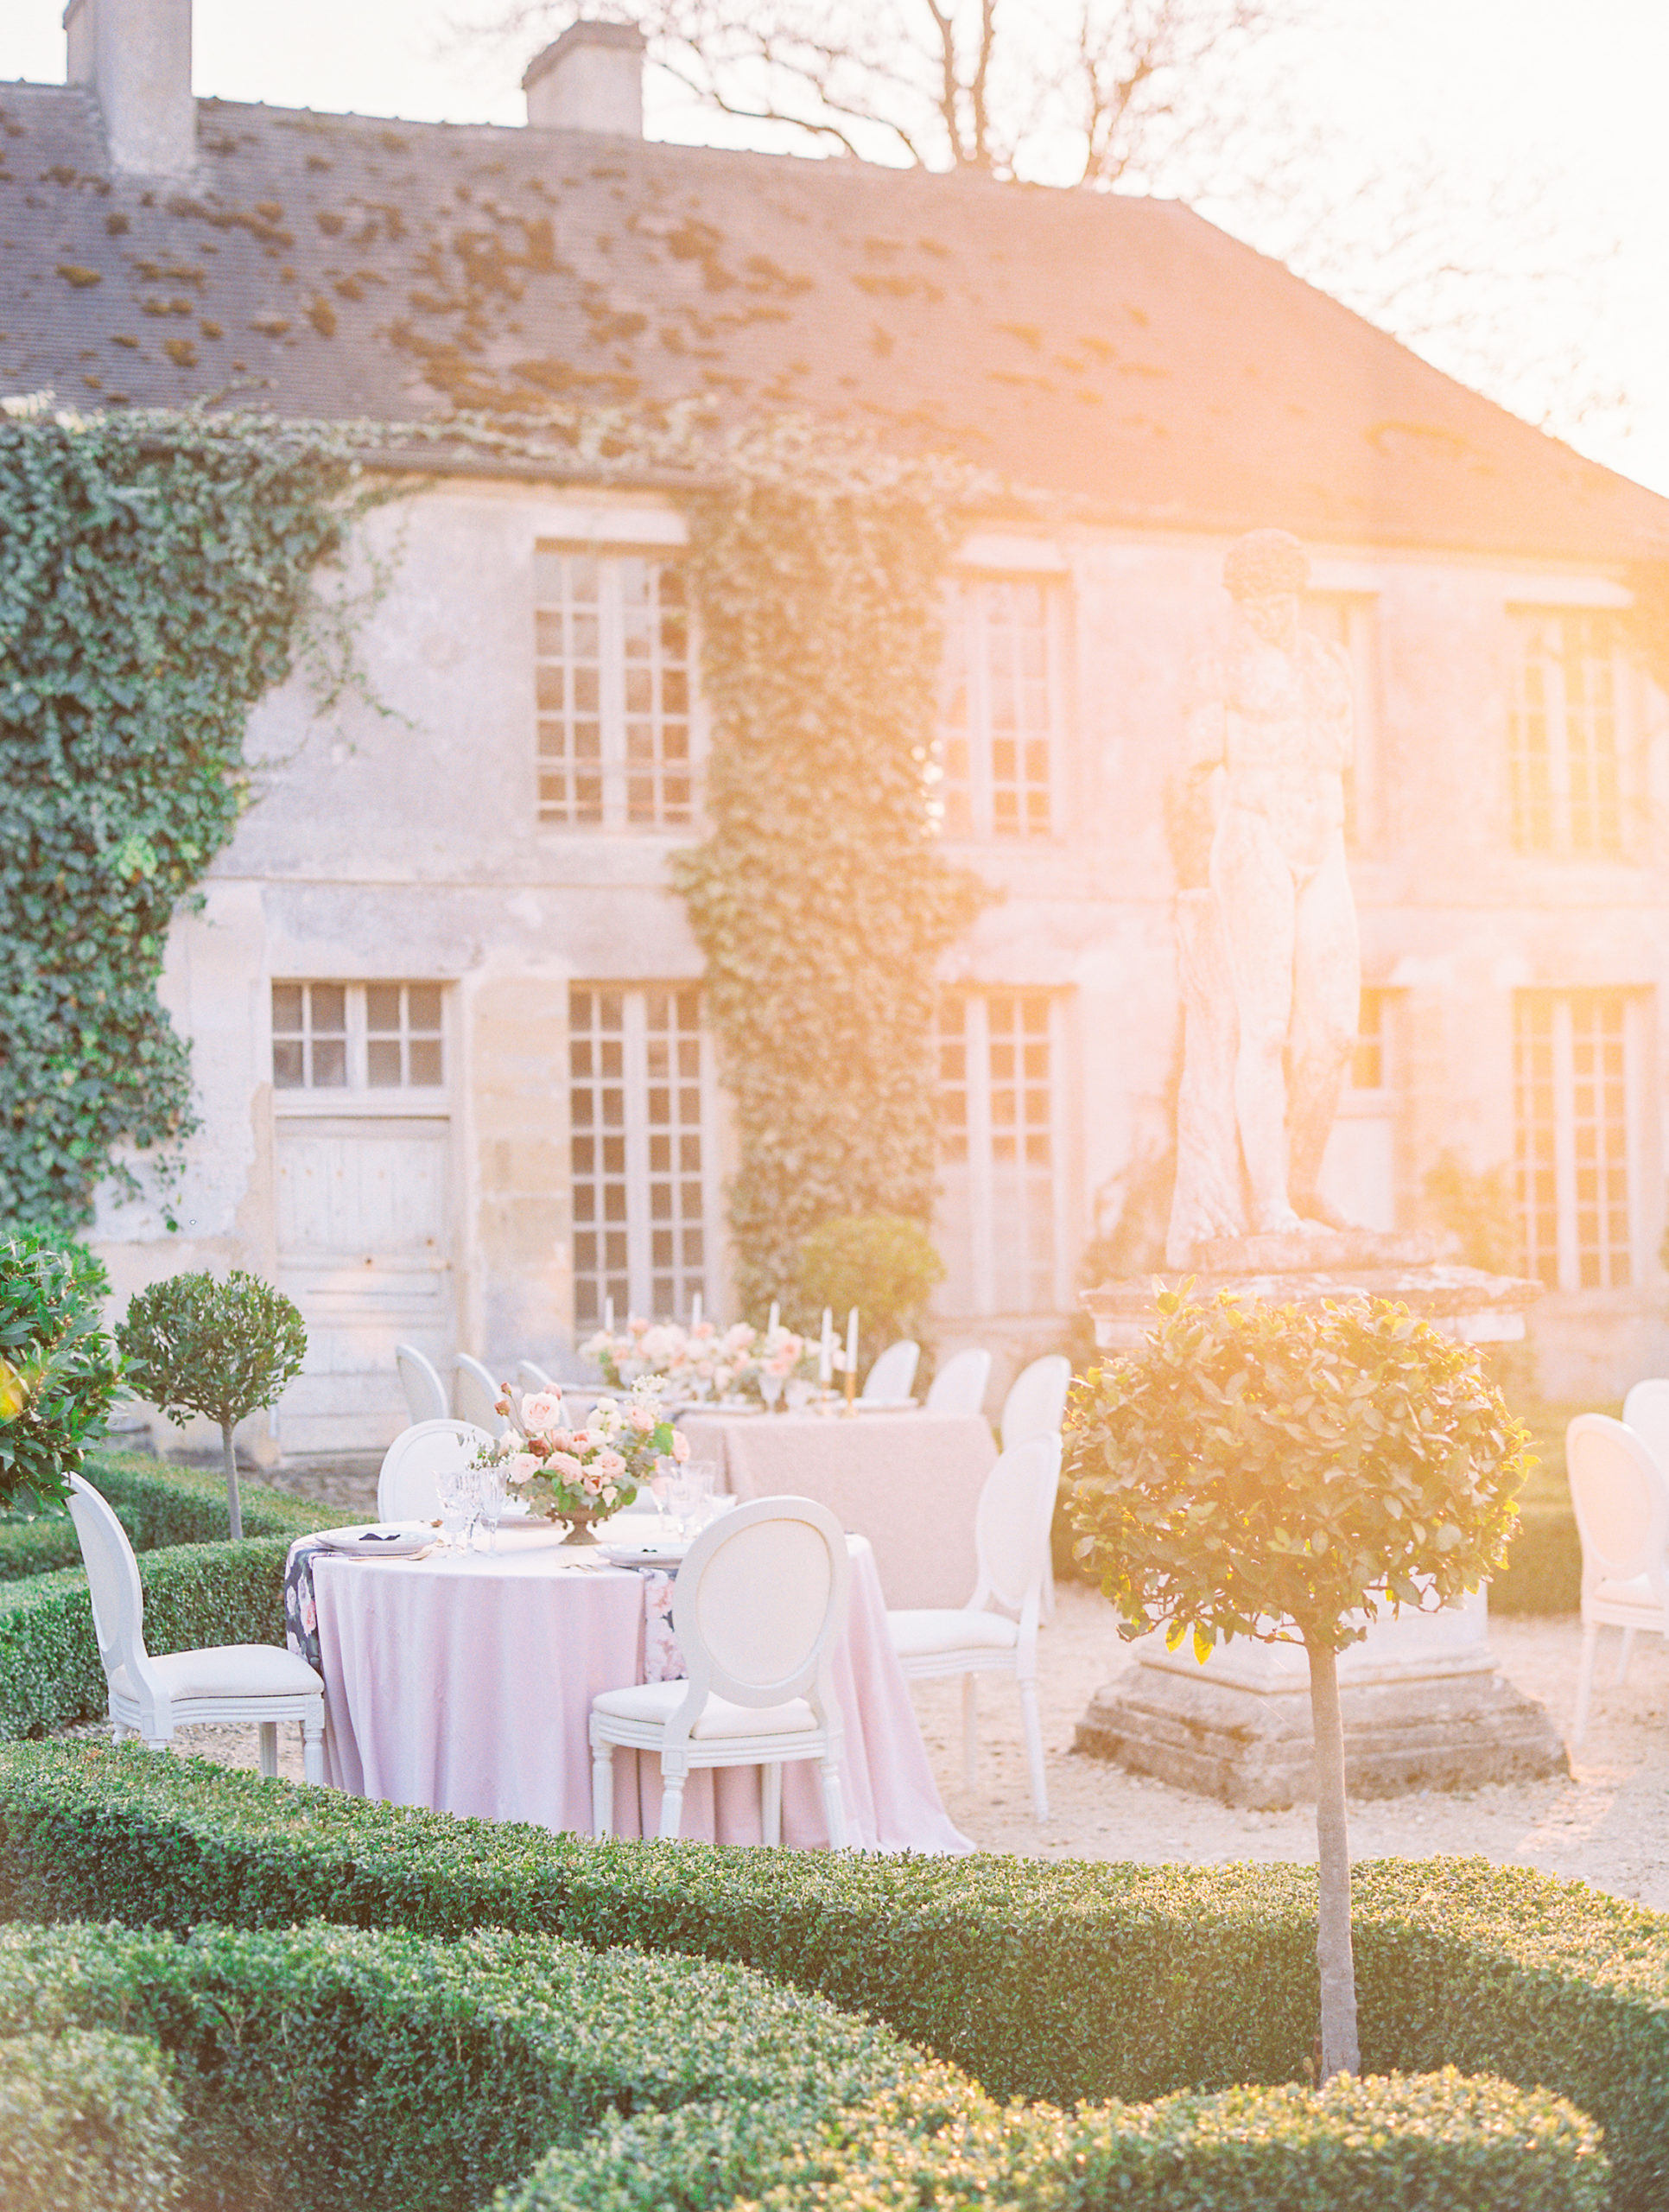 Wedding reception golden hour in garden with statue and table settings at Chateau de Villette Wedding Photography